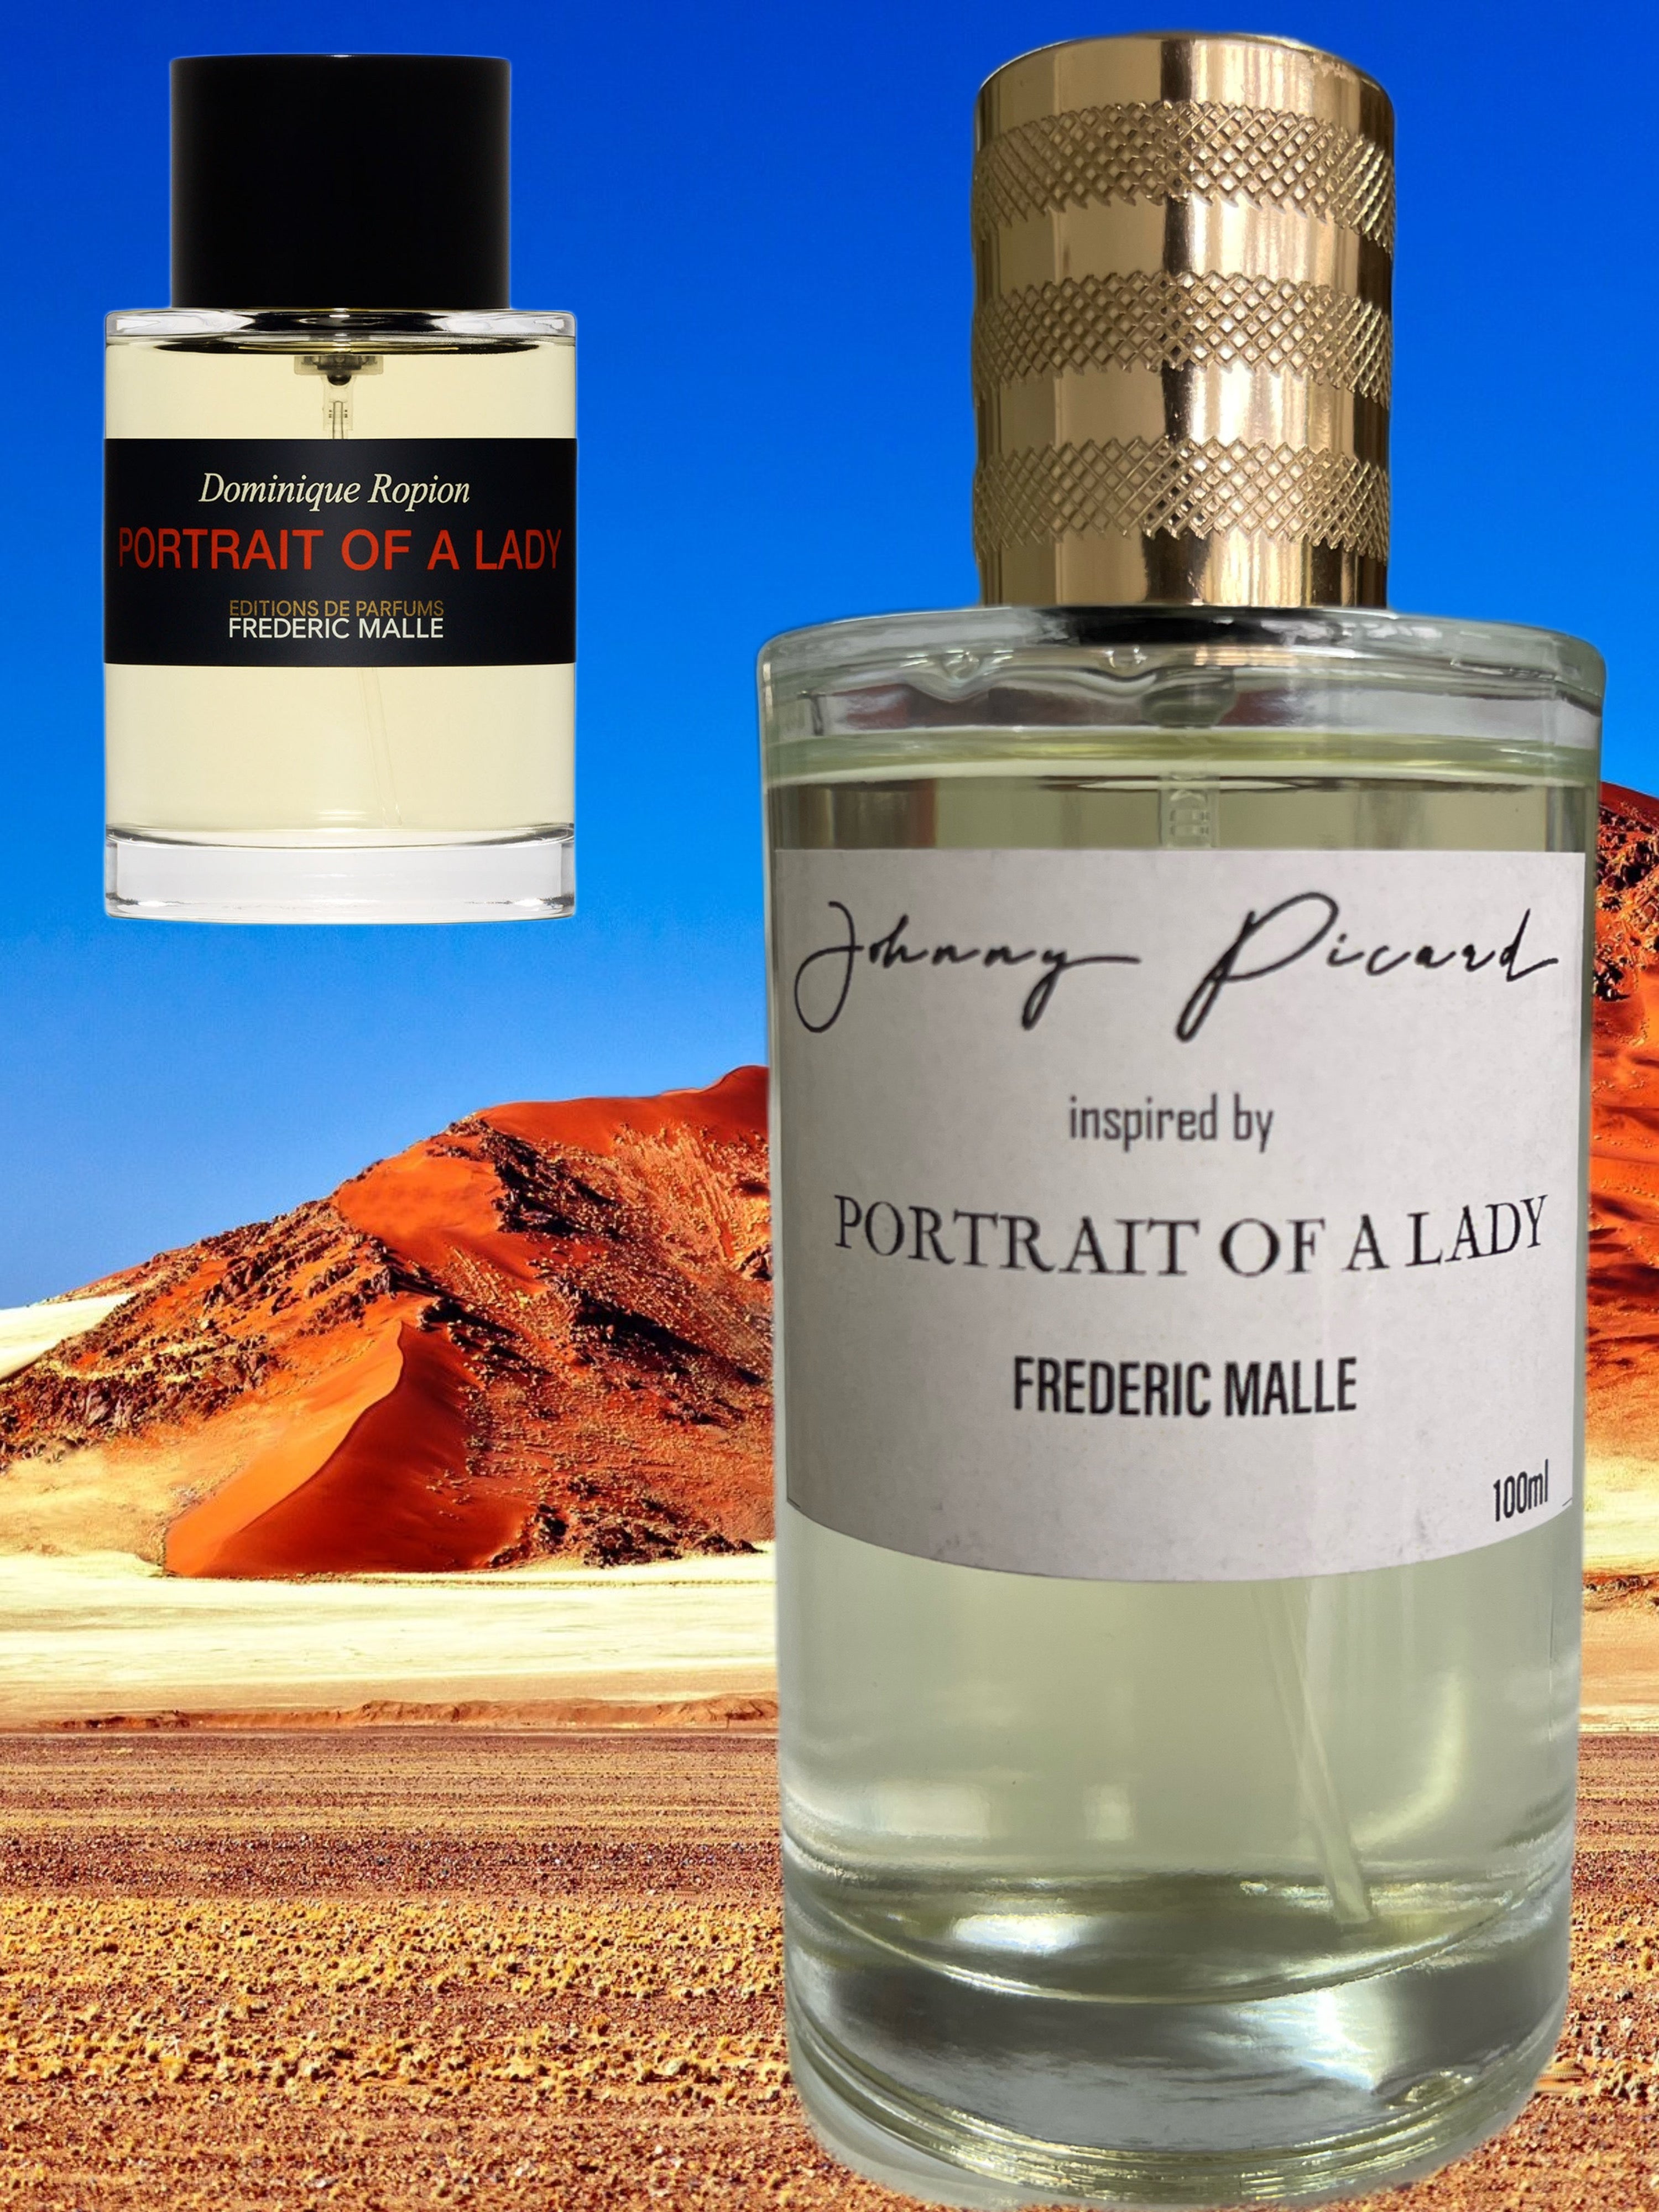 johnny picard inspired by portrait of a lady  FREDERIC MALLE